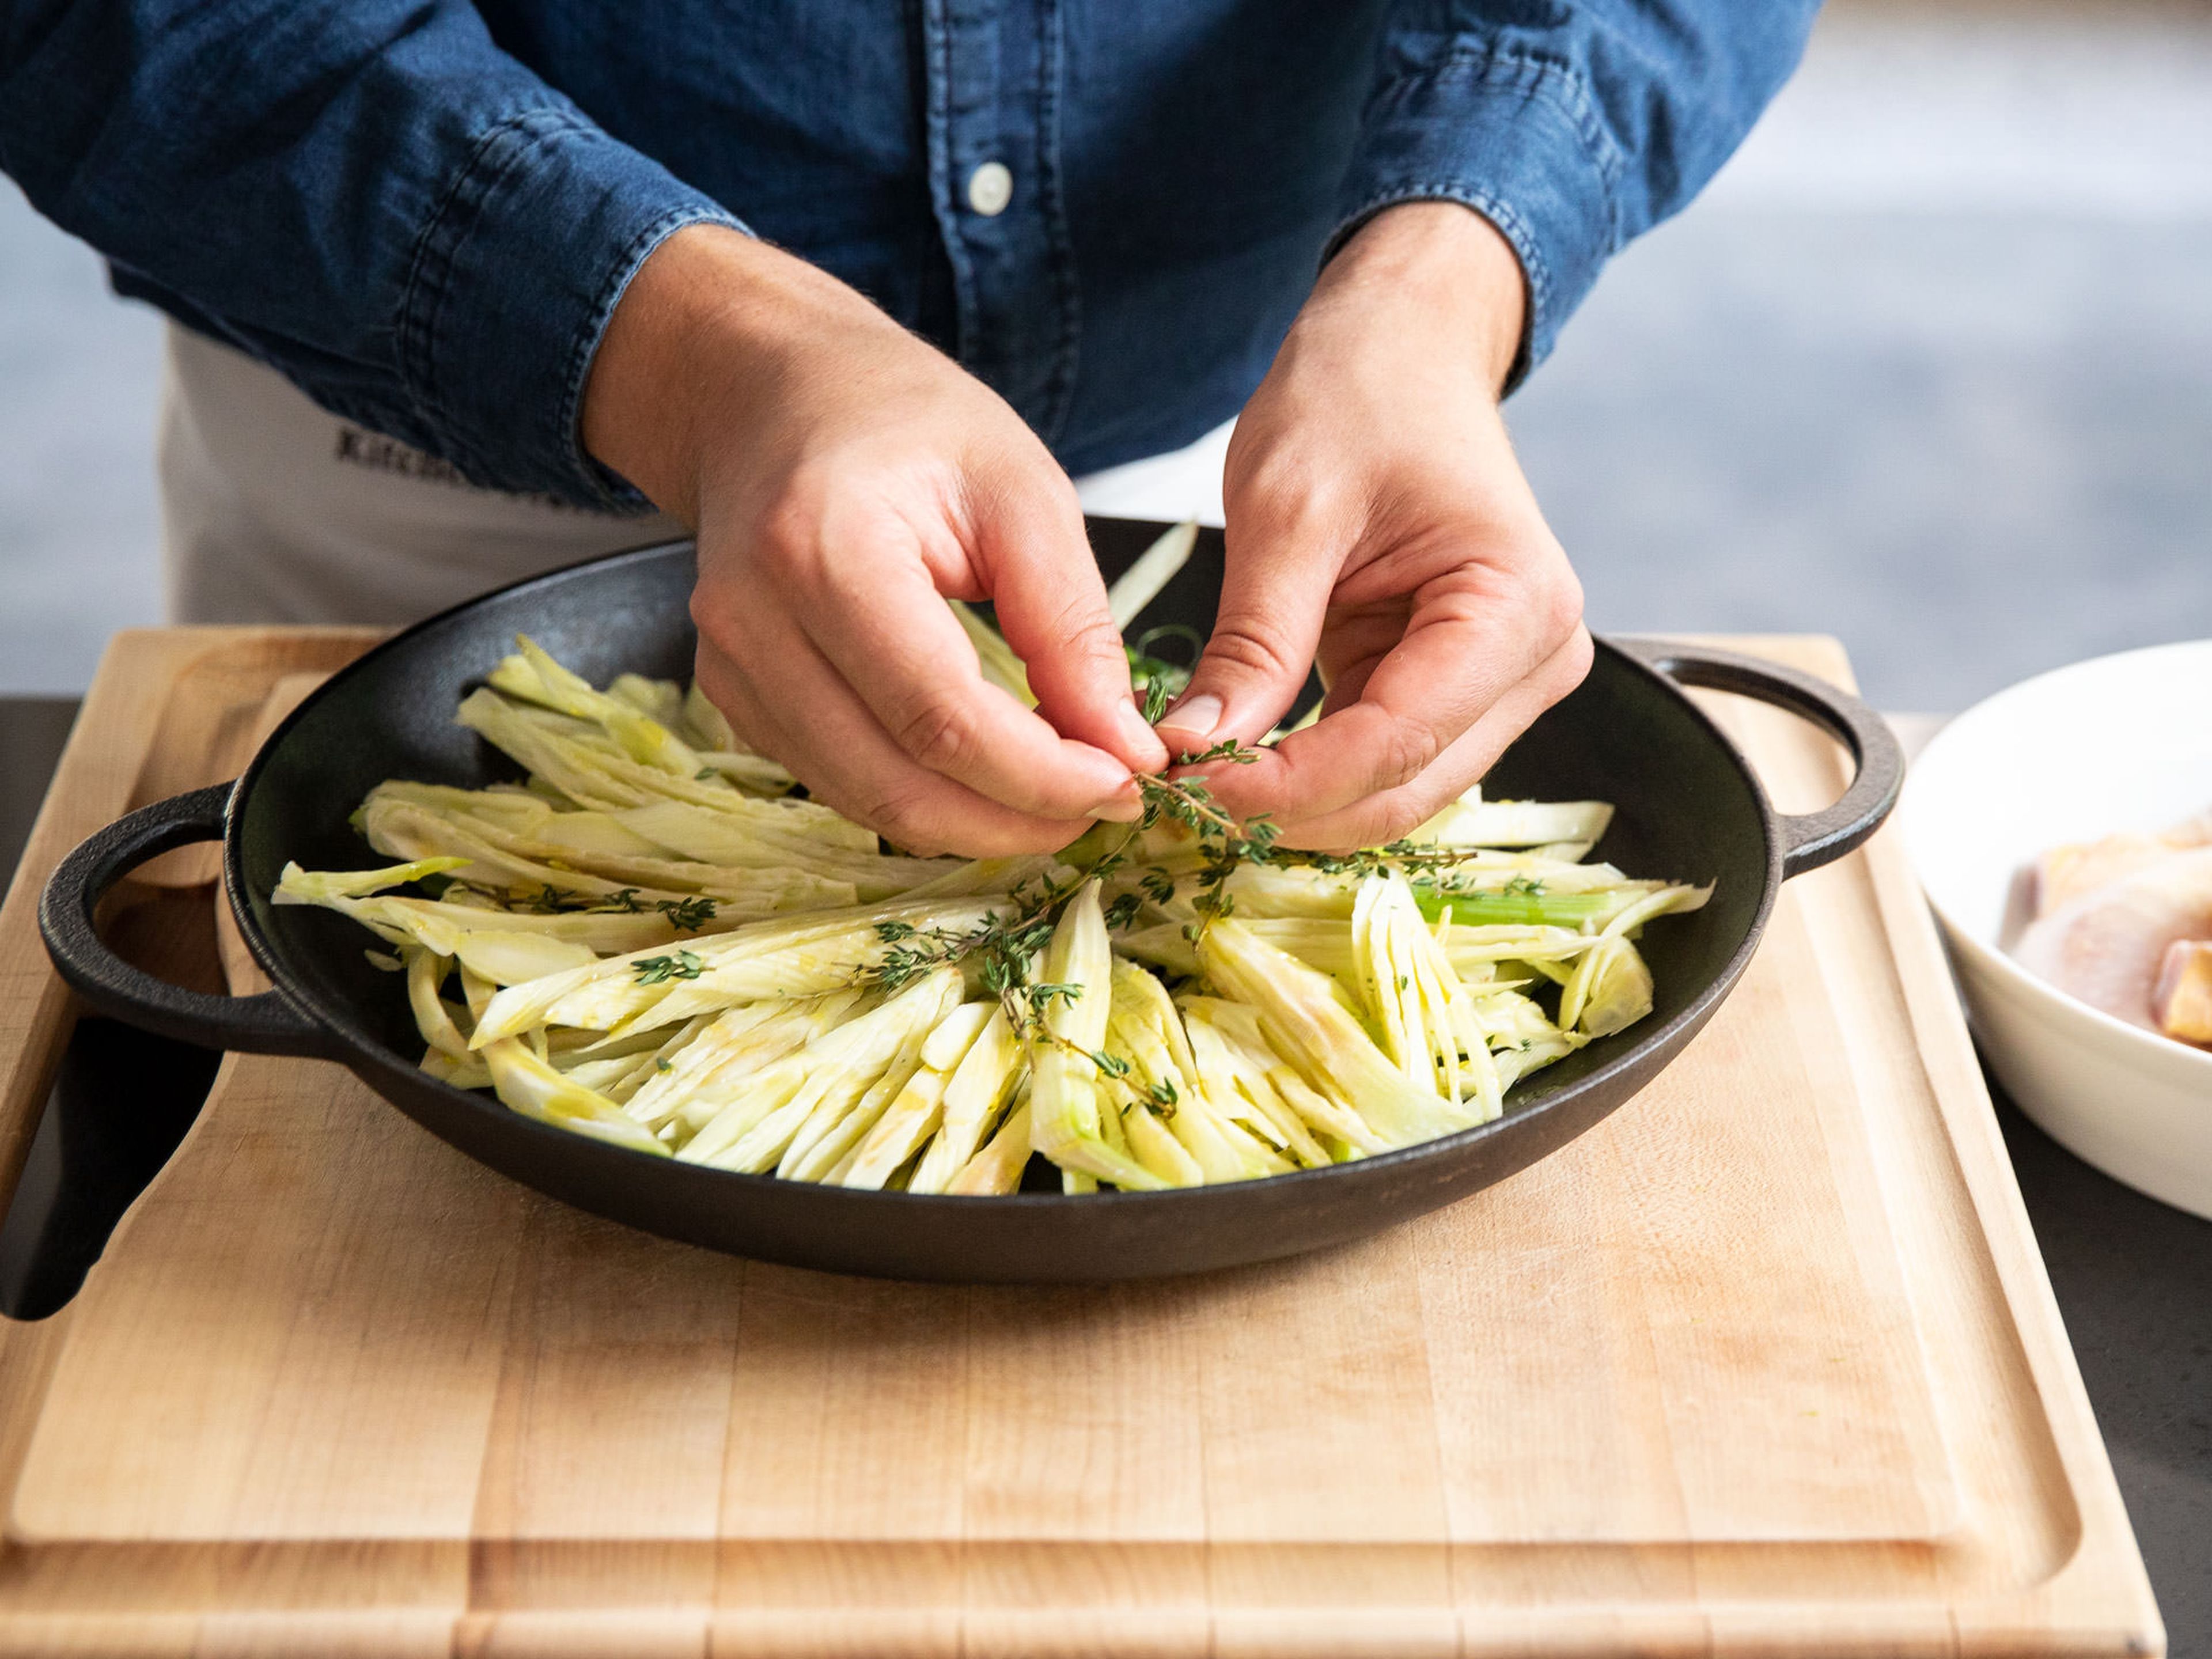 Cut off the ends of the fennel and slice finely. Transfer into a microwave proof baking dish. Drizzle with olive oil and scatter thyme on top. Season with salt and pepper and toss well.